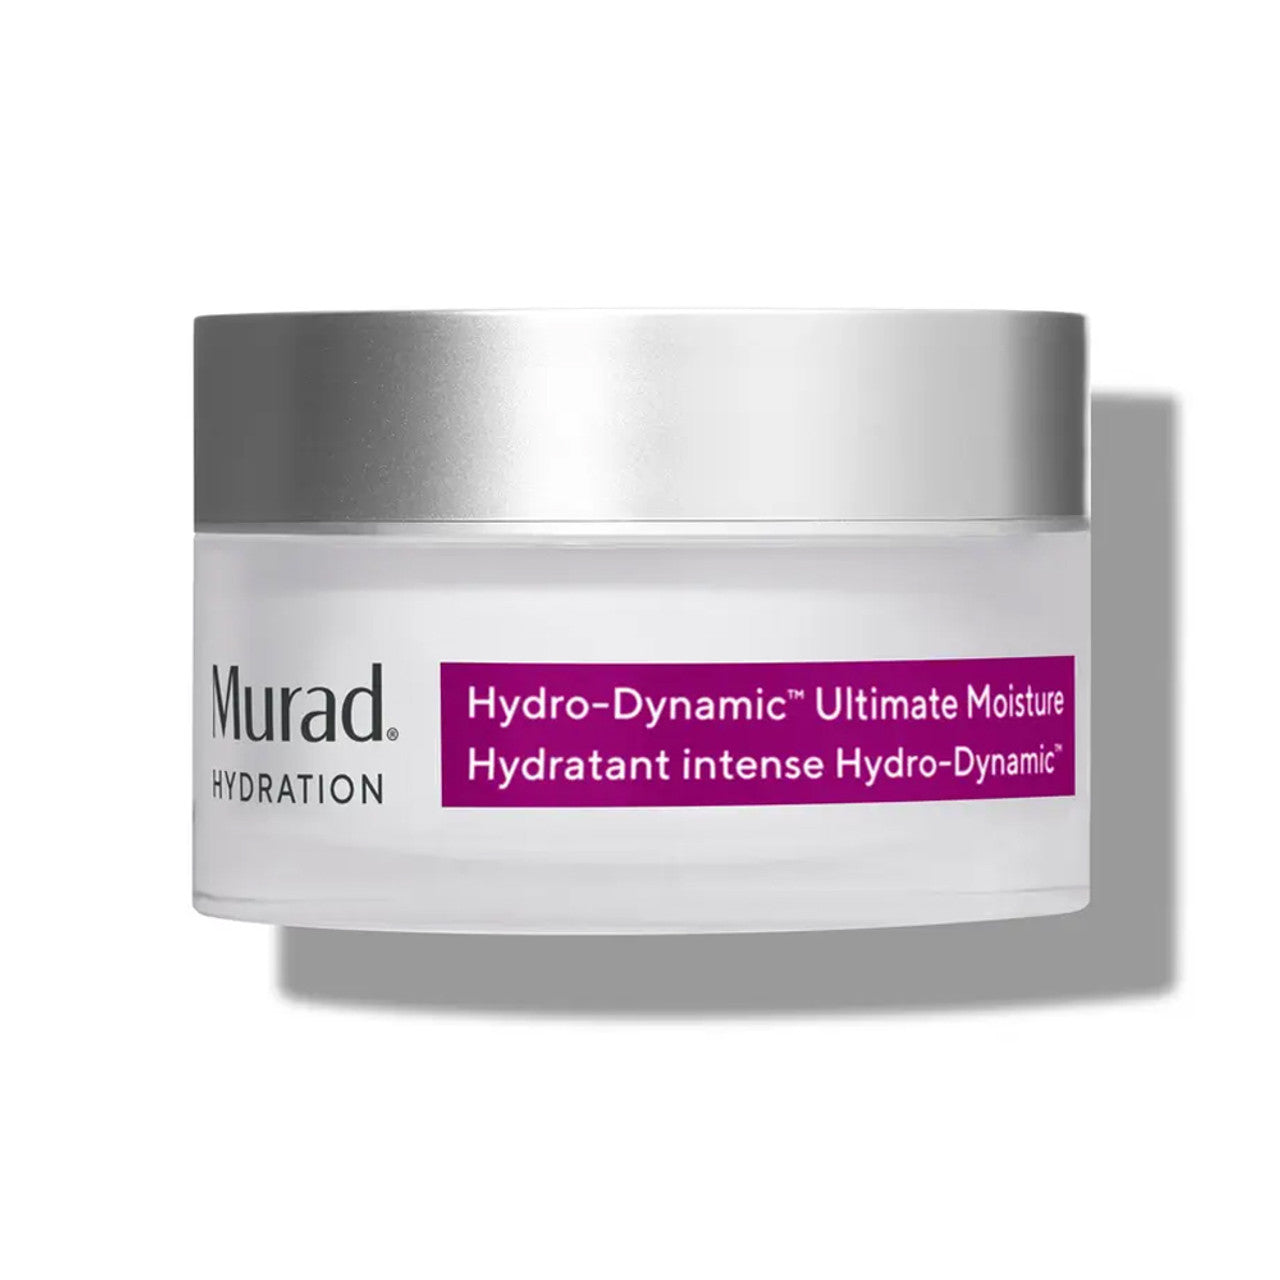 Murad Sale. Murad Hydro-Dynamic Ultimate Moisture is suitable for most skin types. The Murad Hydro-Dynamic Ultimate Moisture contains Hyaluronic Acid, Coconut Extract, Shea Butter, Avocado Oil, Sunflower Oil and Olive Fruit Oils.